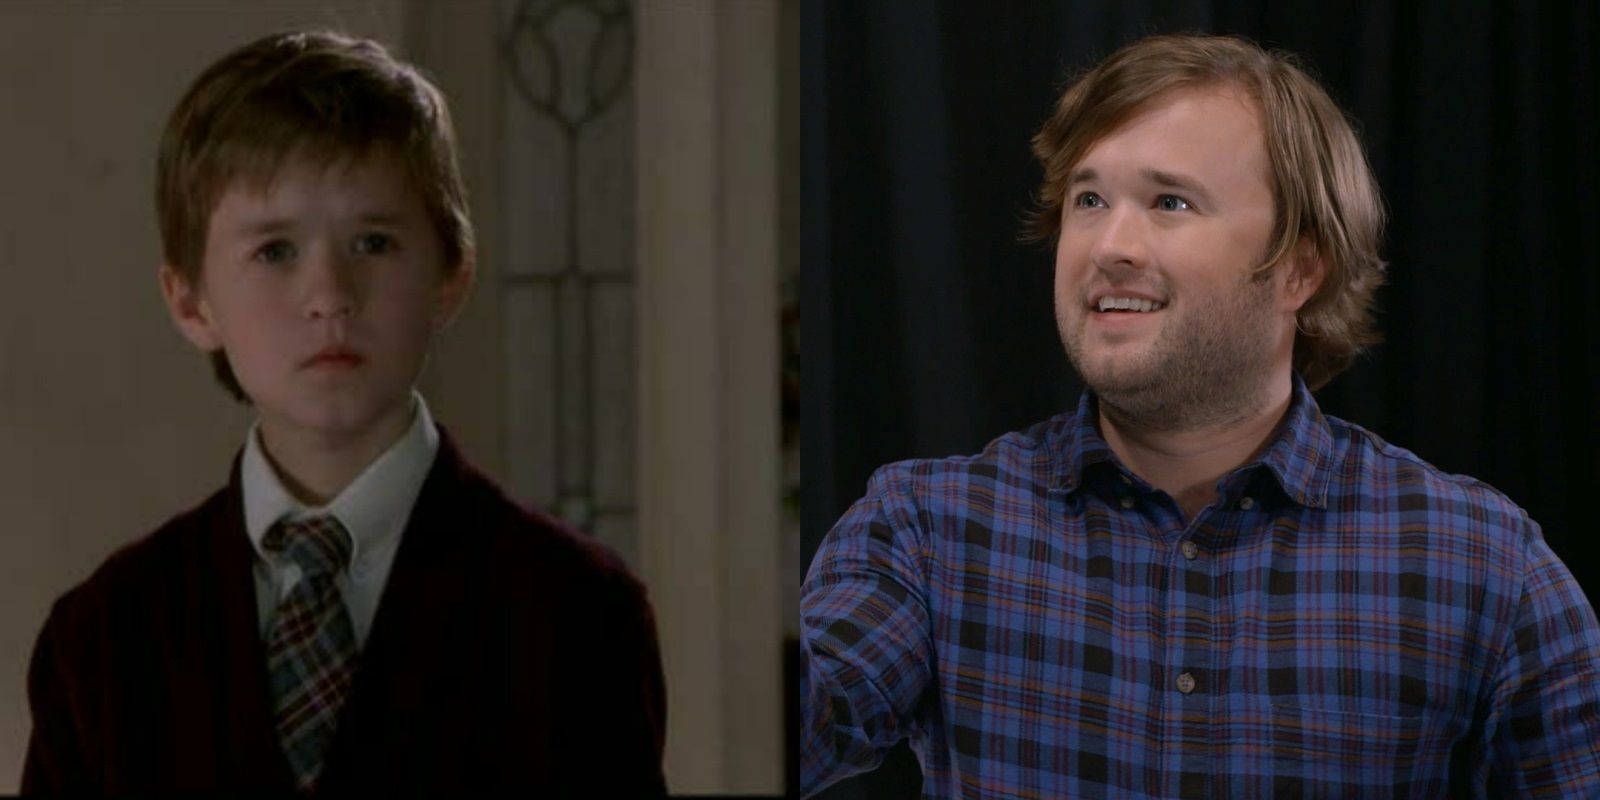 haley joel osment then and now the sixth sense